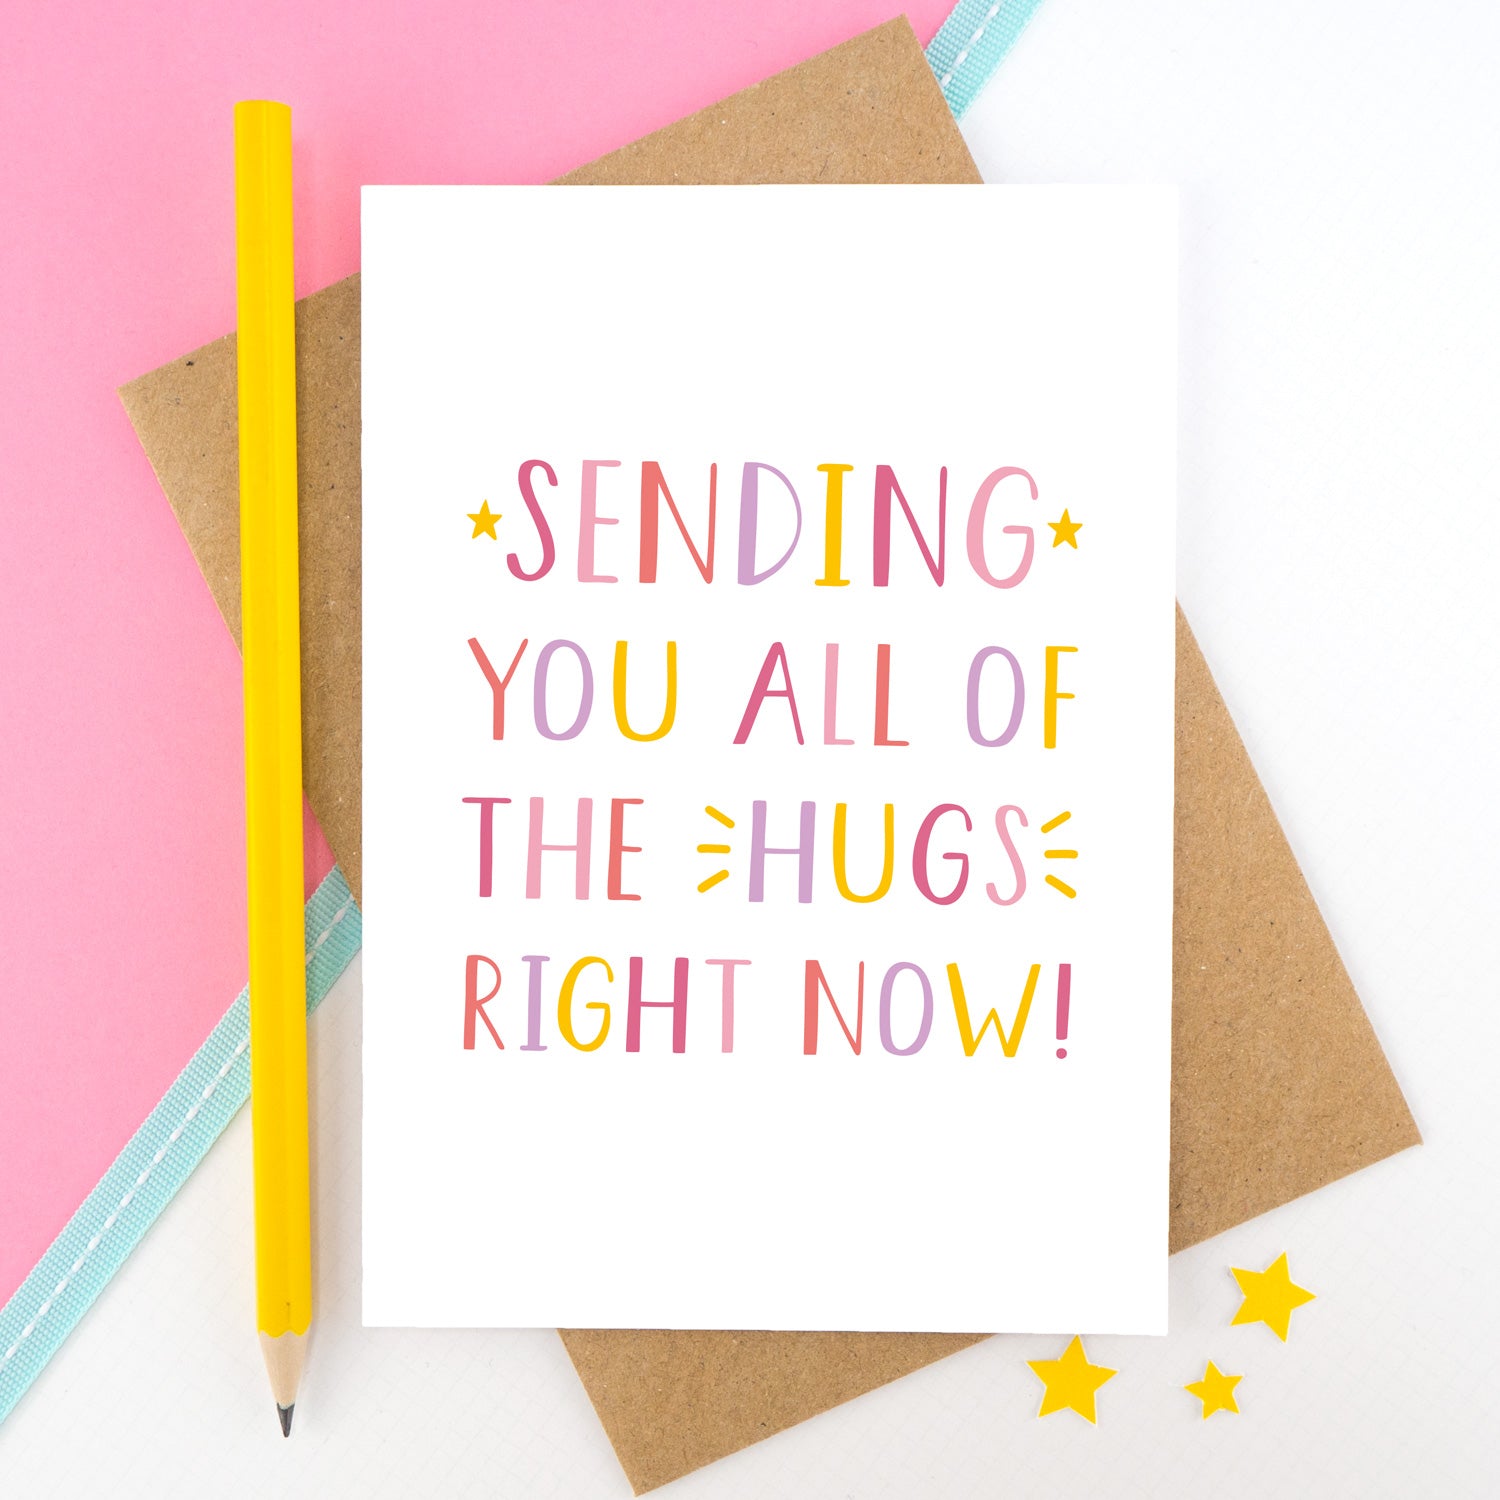 Sending you all of the hugs right card photographed on a pink and white background with a teal ribbon and a bright yellow pencil. This image shows the letters in a pinks, yellow and lilac palette.